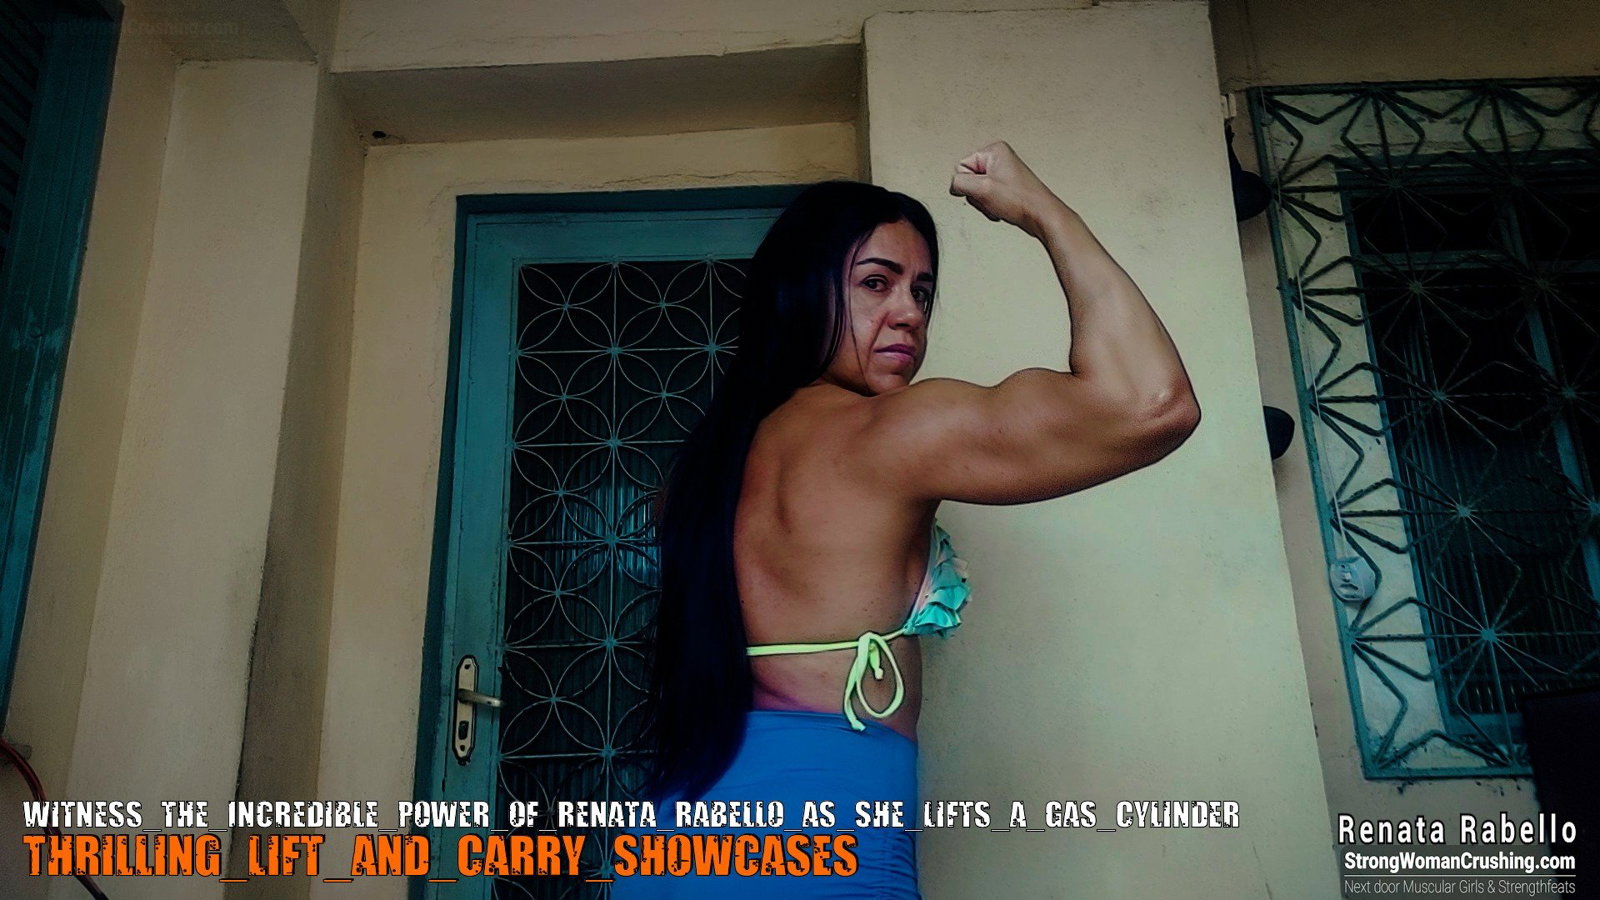 Photo by MusclegirlStrength with the username @MusclegirlStrength, who is a brand user,  September 14, 2023 at 9:11 PM and the text says '👀Want to see the 💪incredible 💪power of Renata Rabello as she lifts a gas cylinder? 🤩Get your 🆕membership now and check out the video at www.strongwomancrushing.com 📲 #RenataRabello #IncrediblePower #StrongWoman #GasCylinder #Membership'